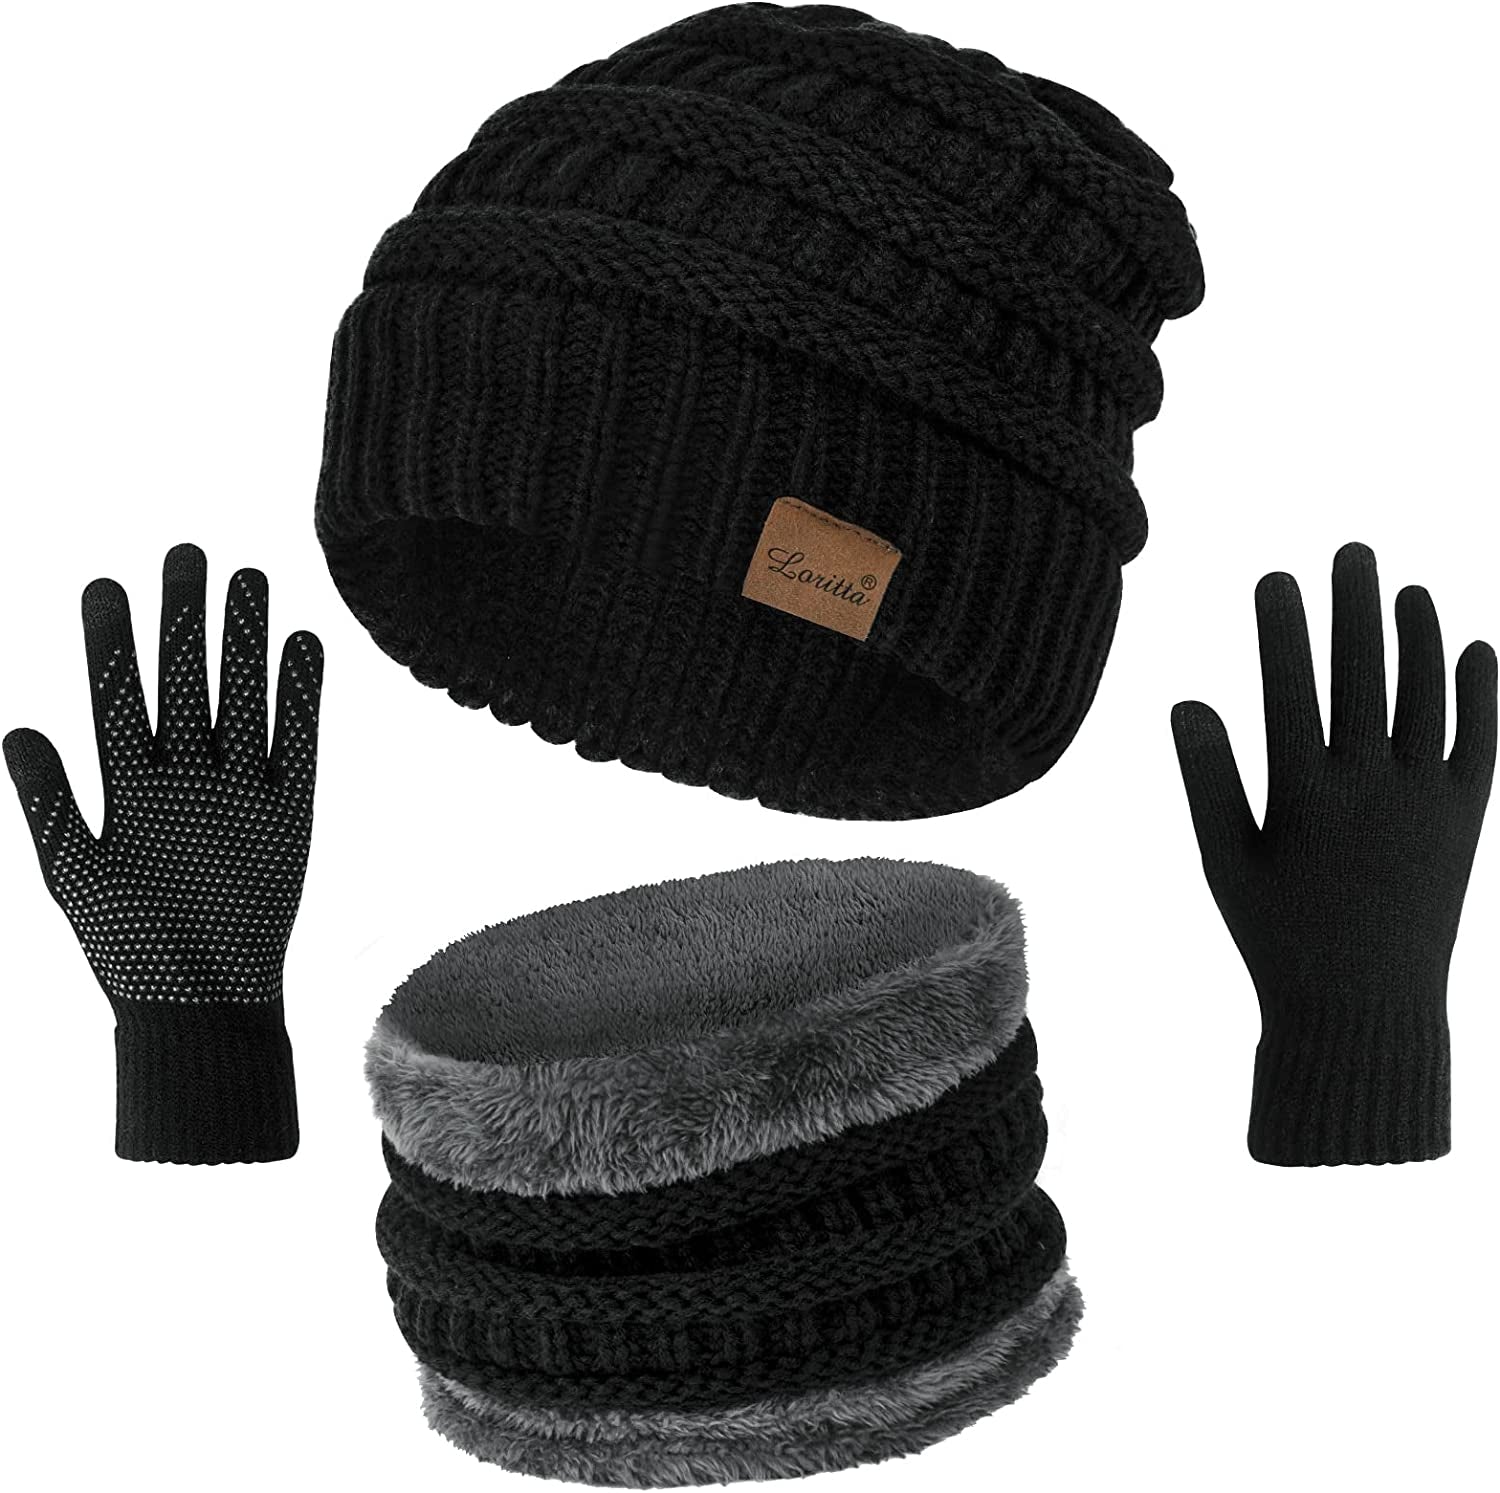 Sherpa Beanie Winter Hats Scarf and Gloves Set for Women Slouchy Skull Cap Sherpa Lined Neck Warmer Glove